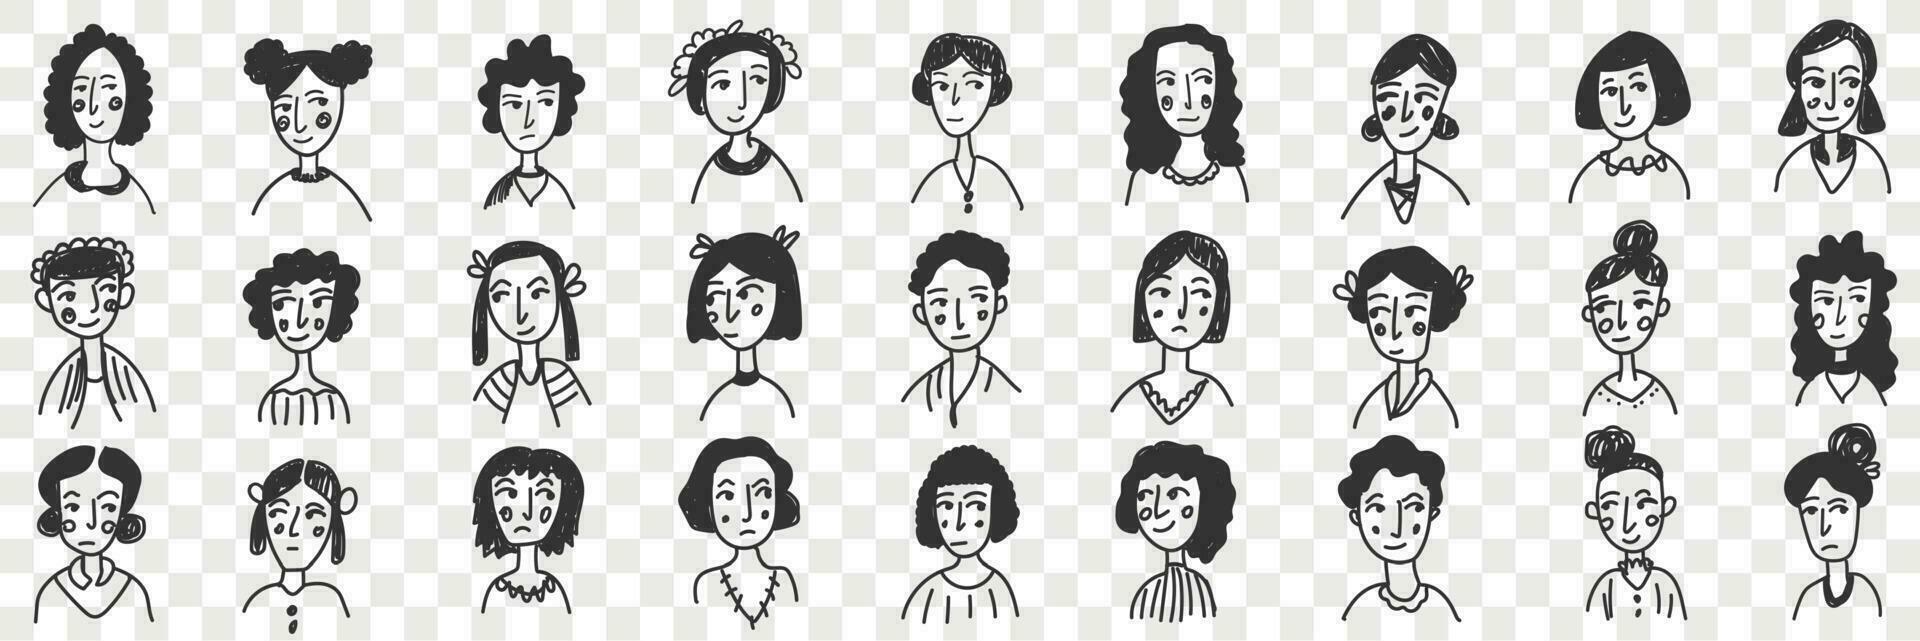 Hairstyles of brunette women and men doodle set. Collection of hand drawn female and male faces with various short and long straight and curly hairstyles portraits isolated on transparent vector